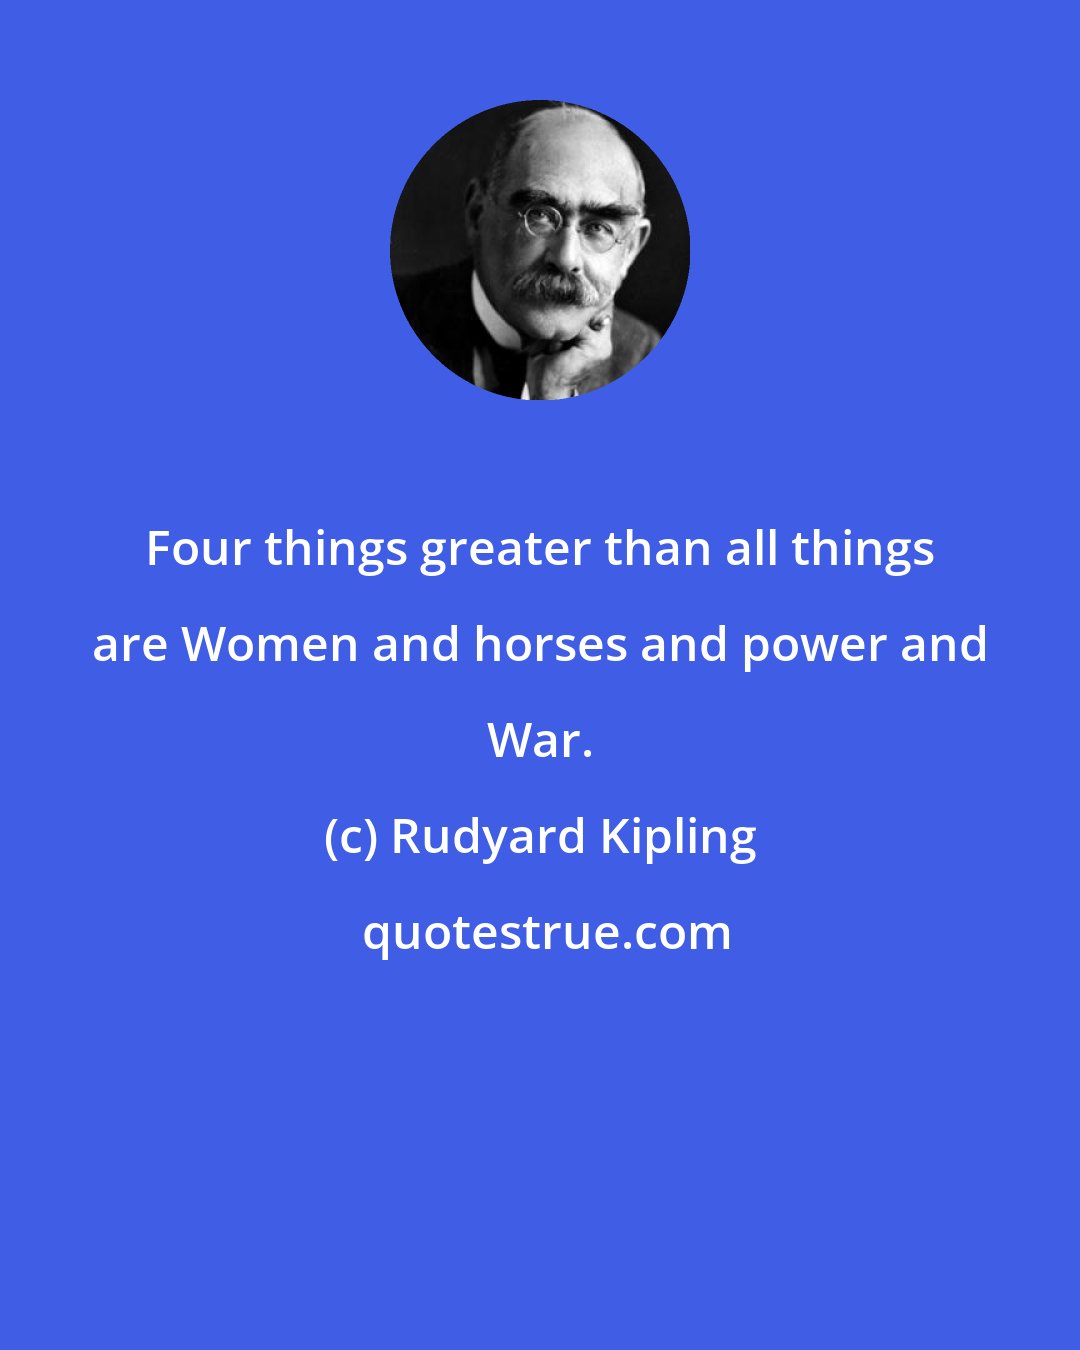 Rudyard Kipling: Four things greater than all things are Women and horses and power and War.